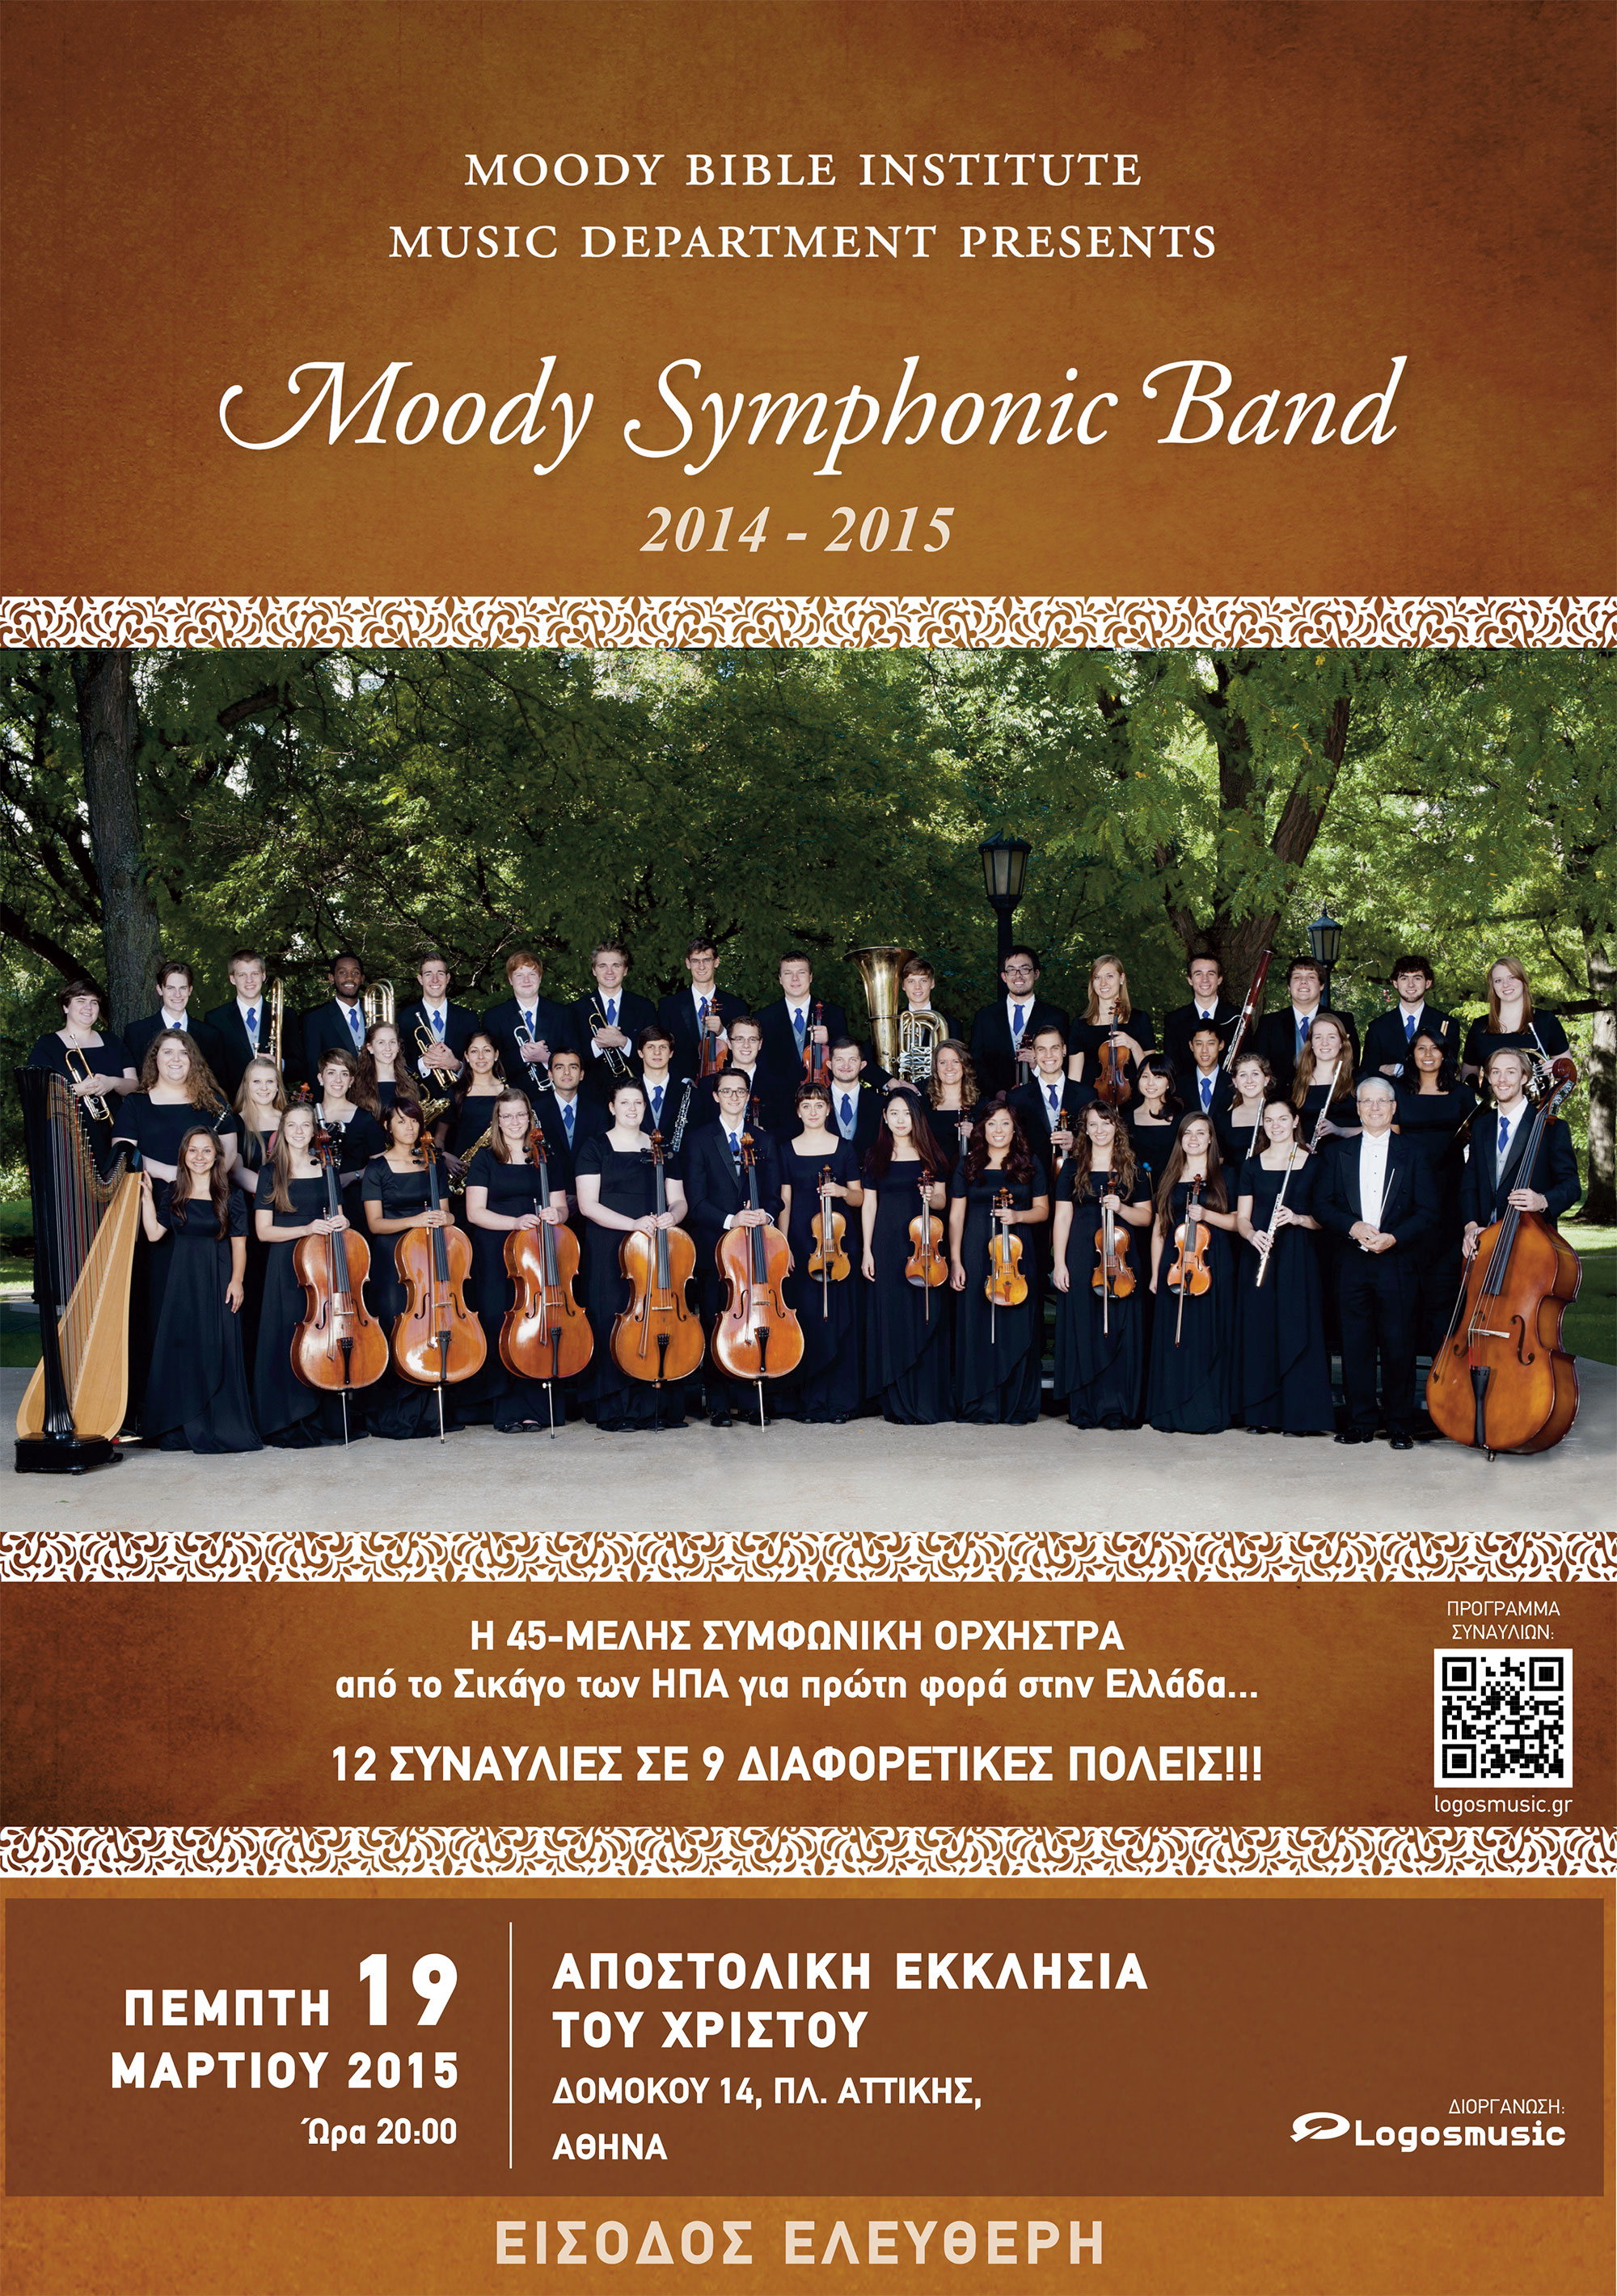 POSTER - MOODY SYMPHONIC BAND, Απ. Εκκλησία του Χριστού,Αθήνα